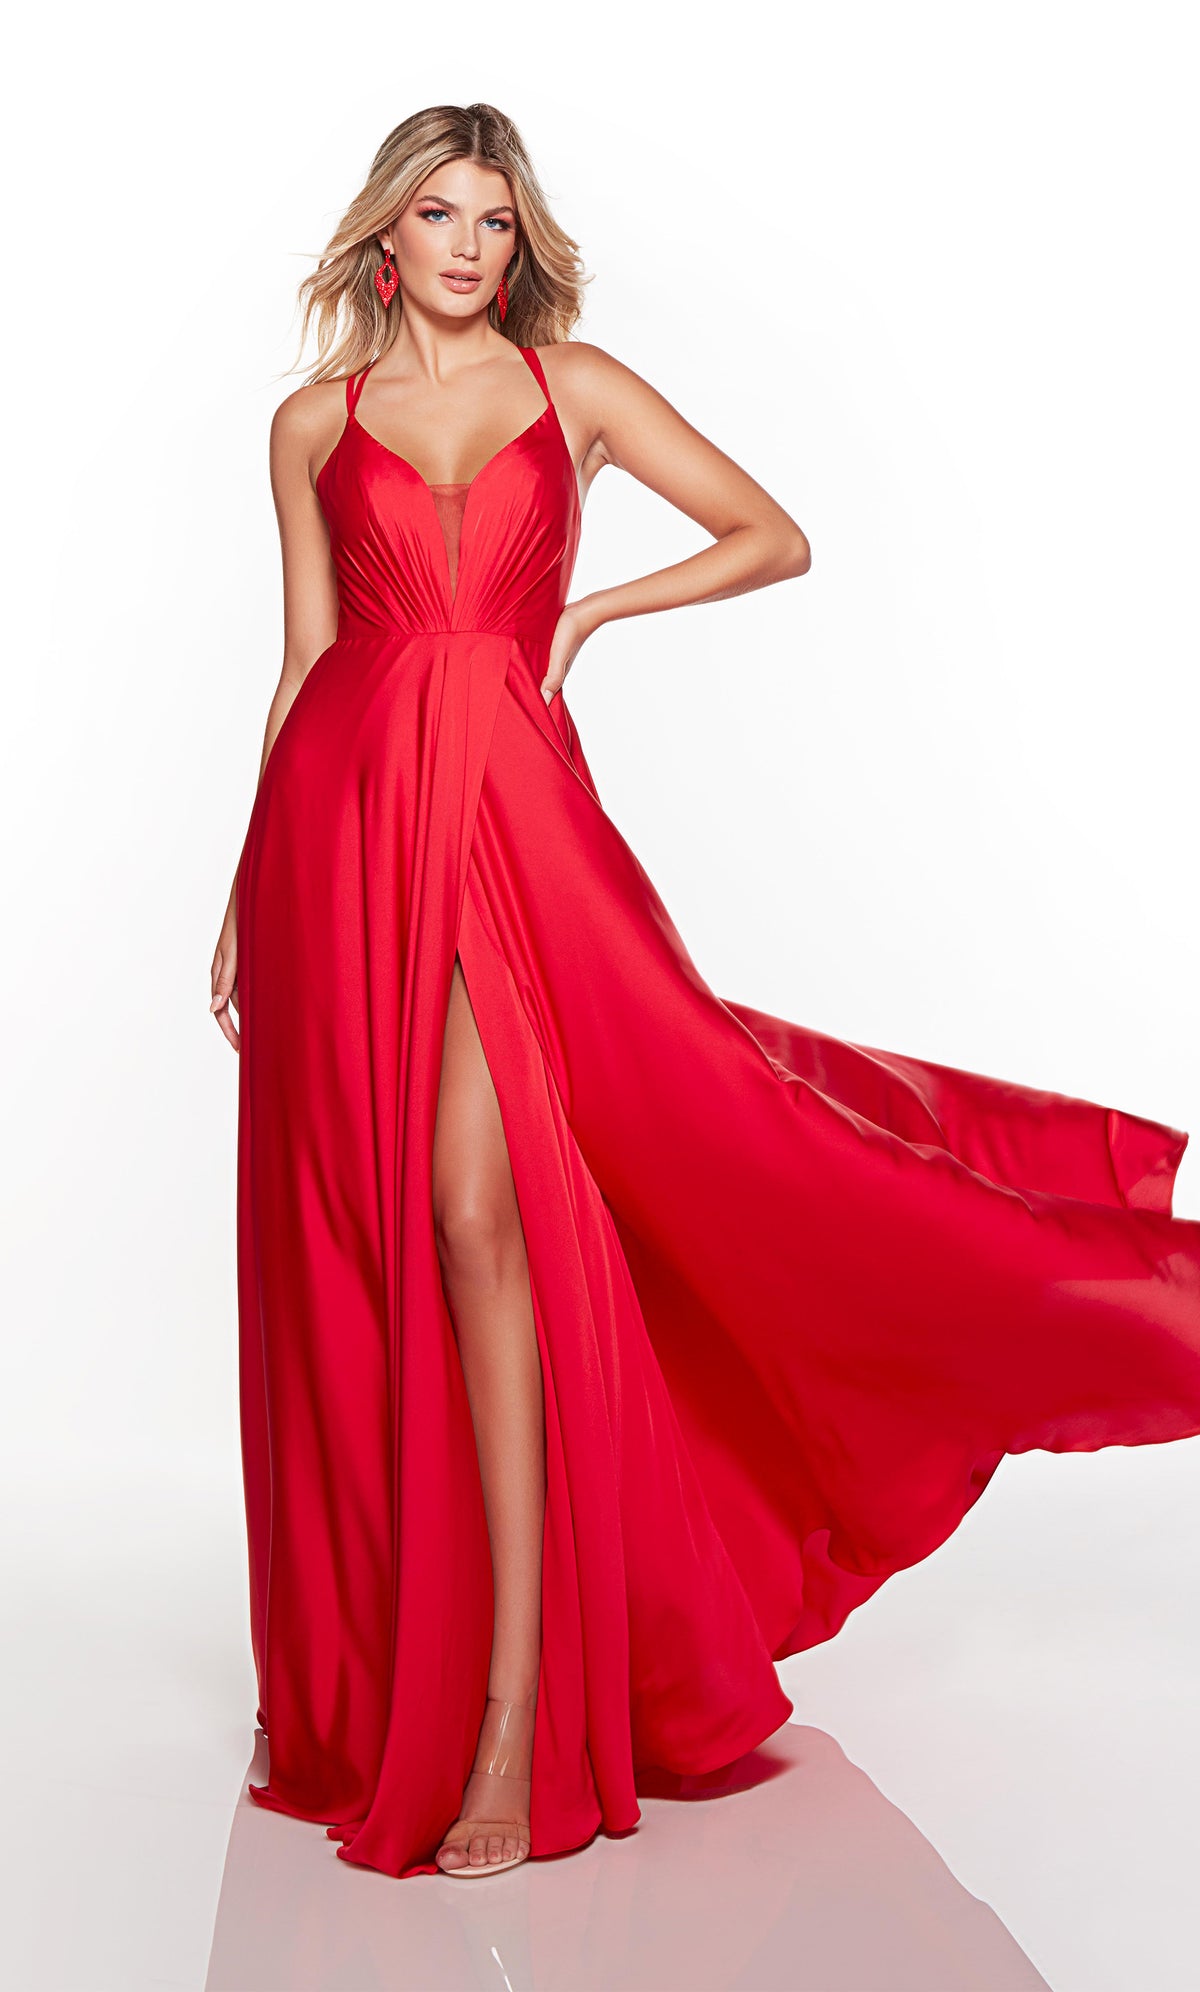 Flowy red formal dress with a plunging neckline and front slit.